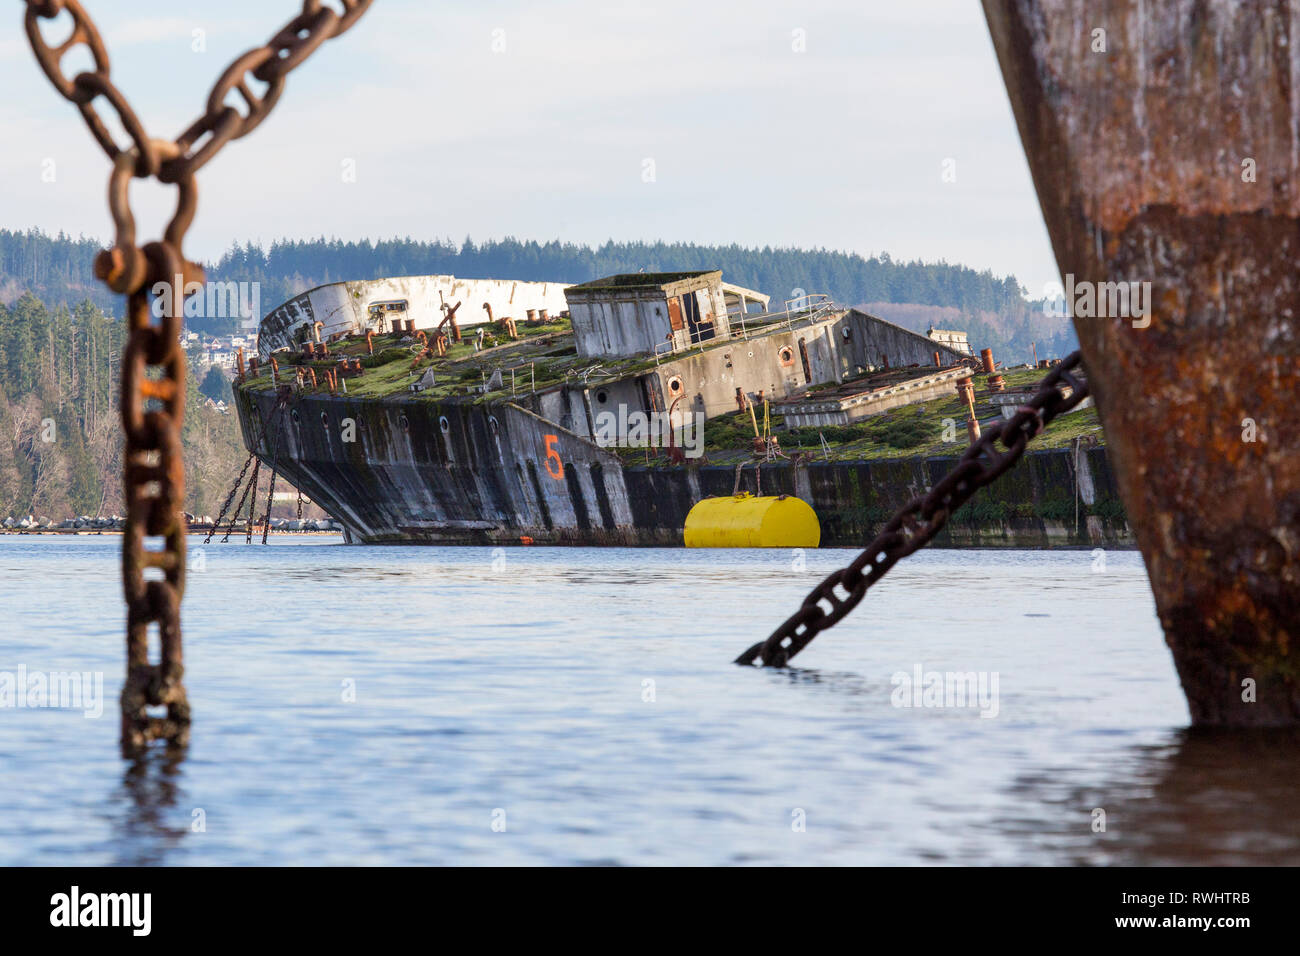 A concrete barge, used as a breakwater for Catalyst Paper's Mill in Powell River, British Columbia, Canada Stock Photo